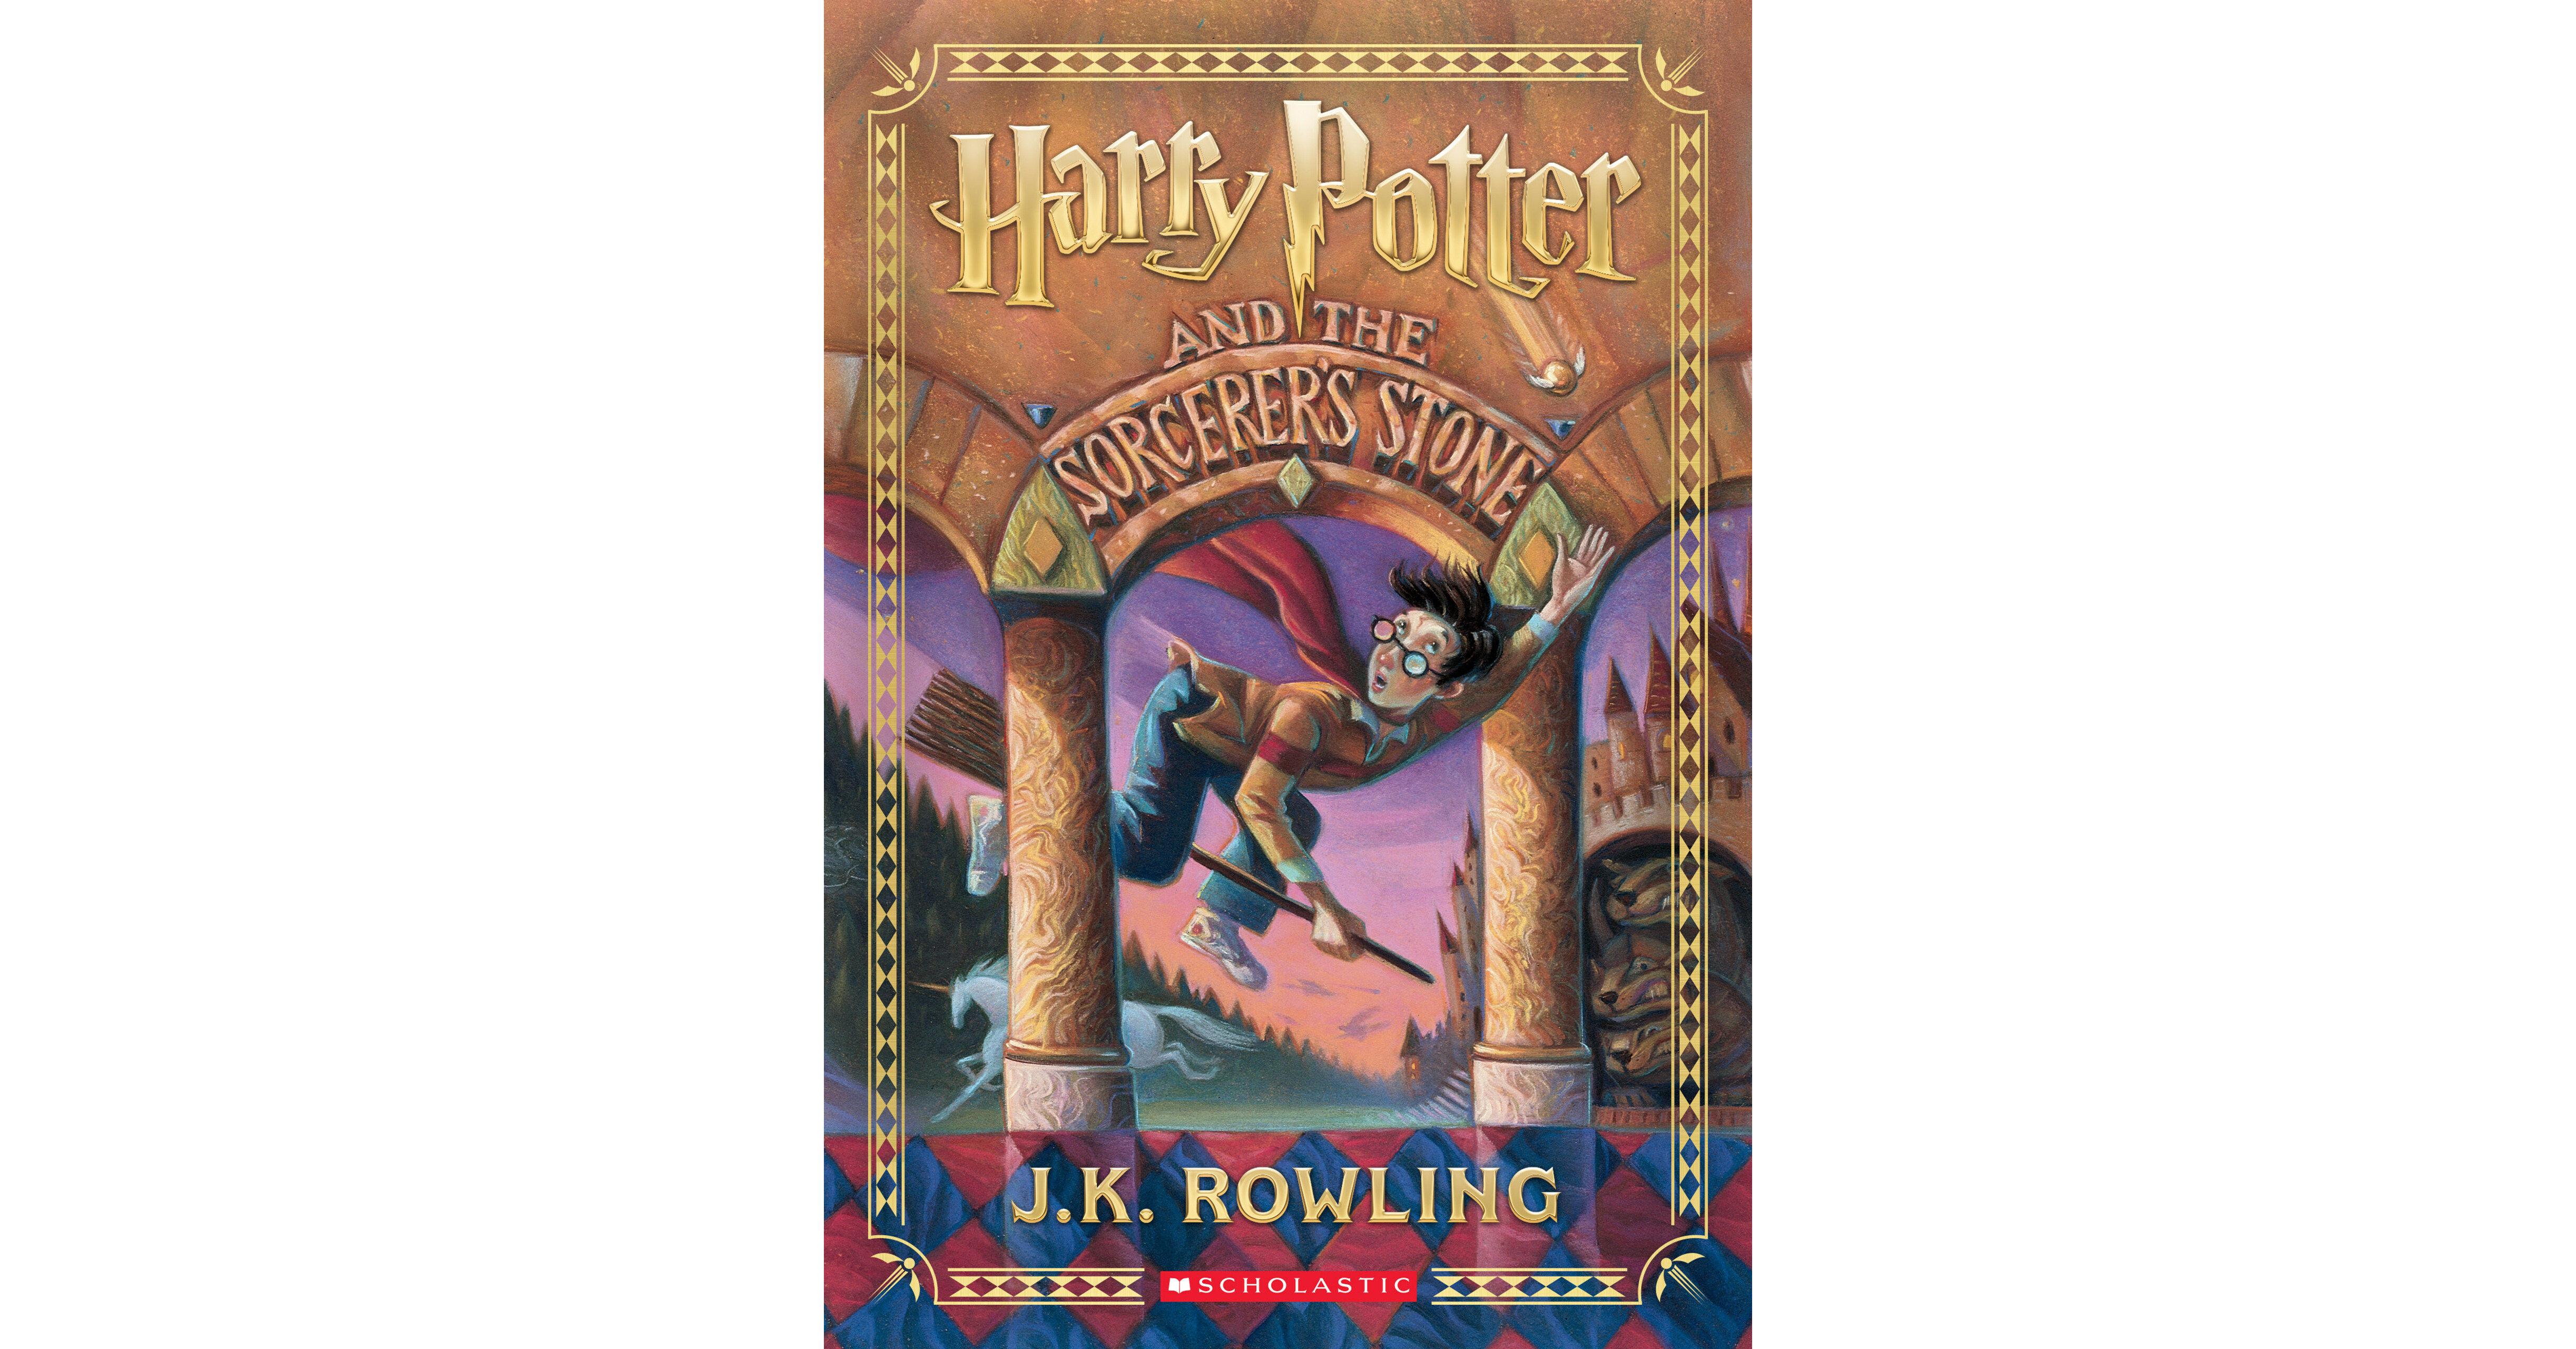 New Scholastic Harry Potter book covers, want it!